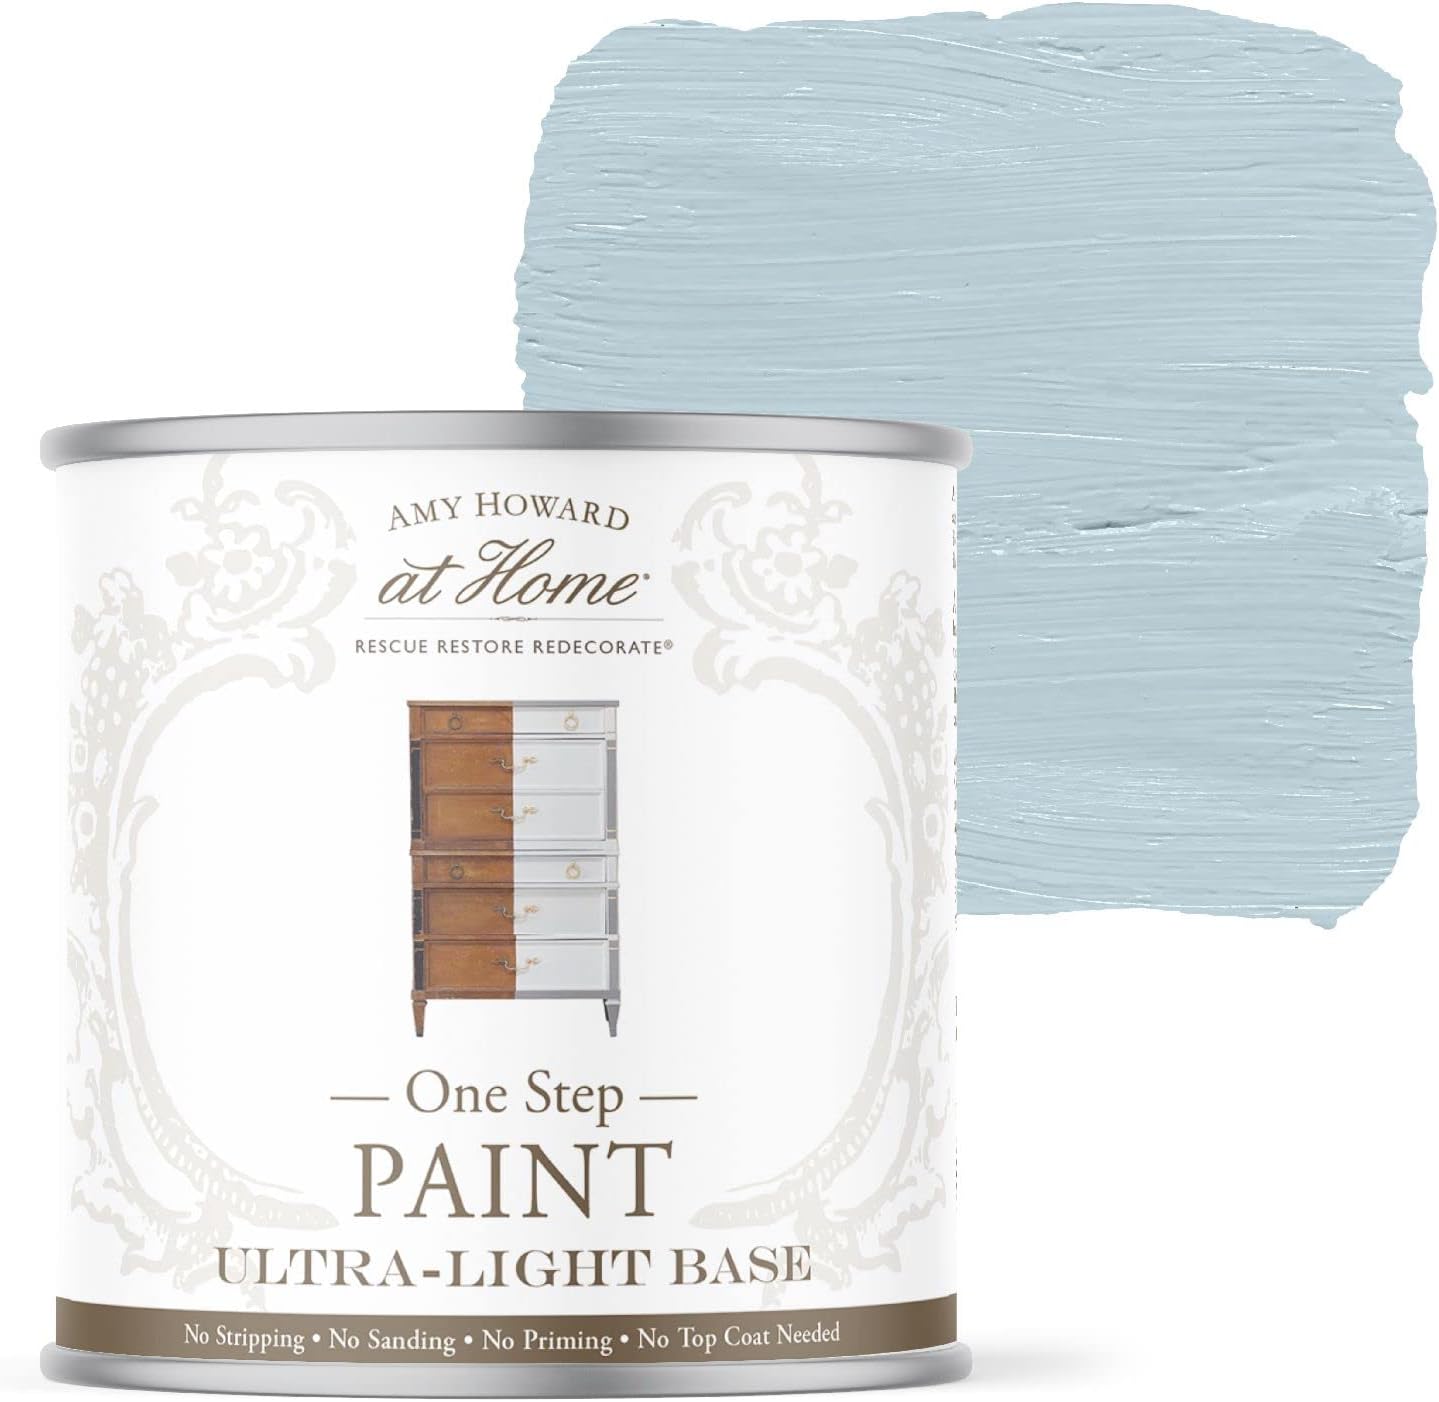 Amy Howard Home - One-Step Paint - Chalk Paint for [...]